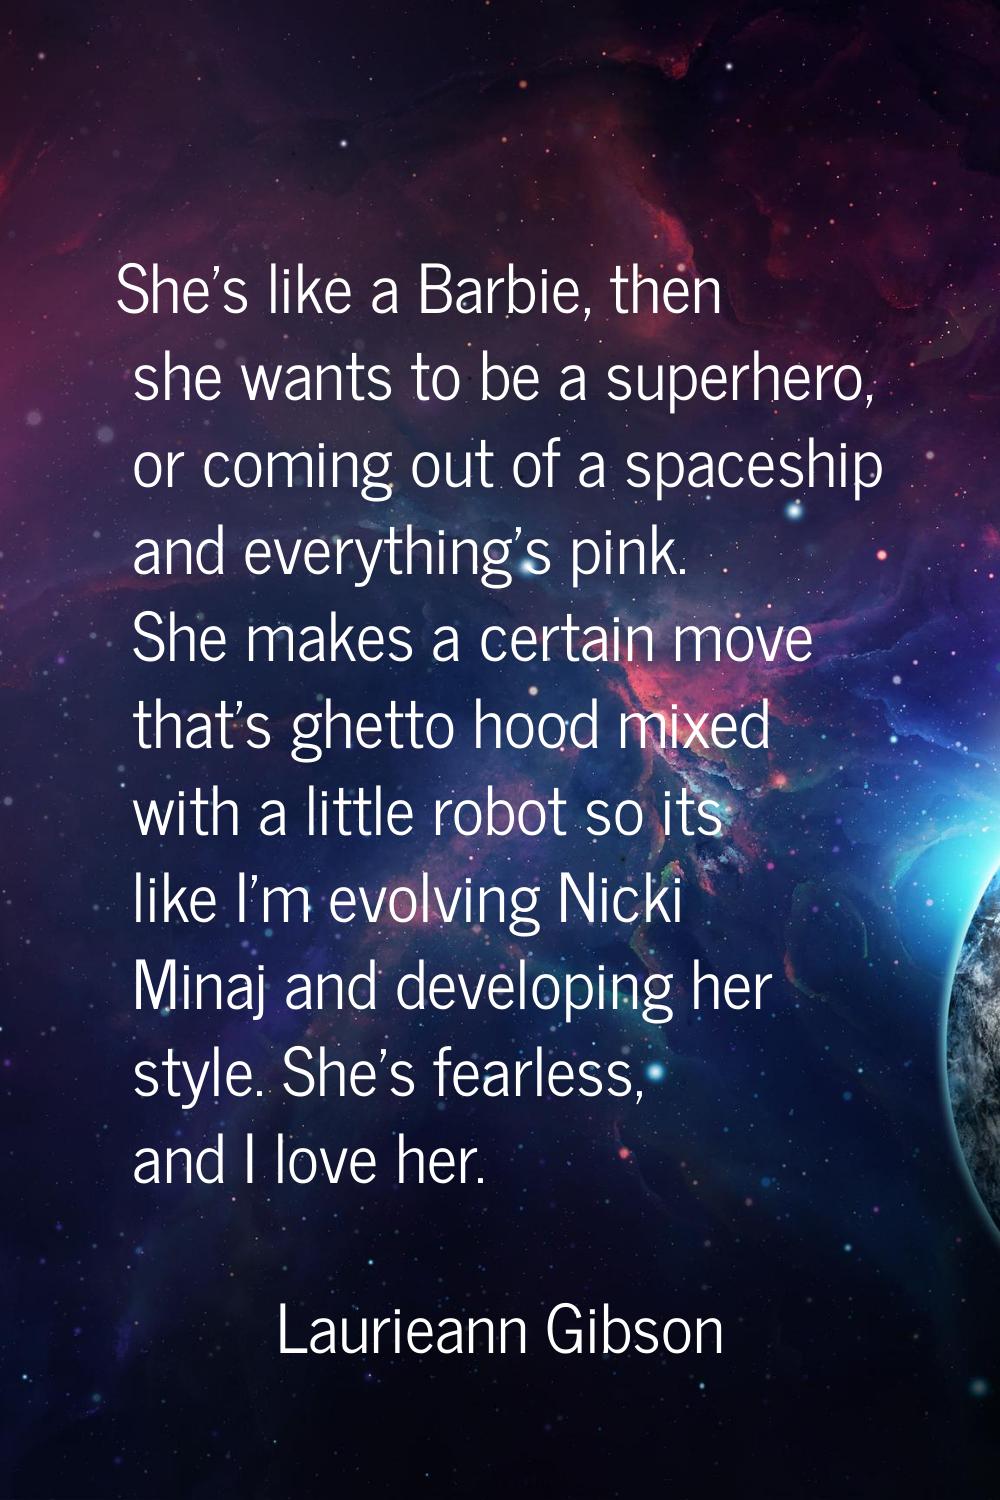 She's like a Barbie, then she wants to be a superhero, or coming out of a spaceship and everything'